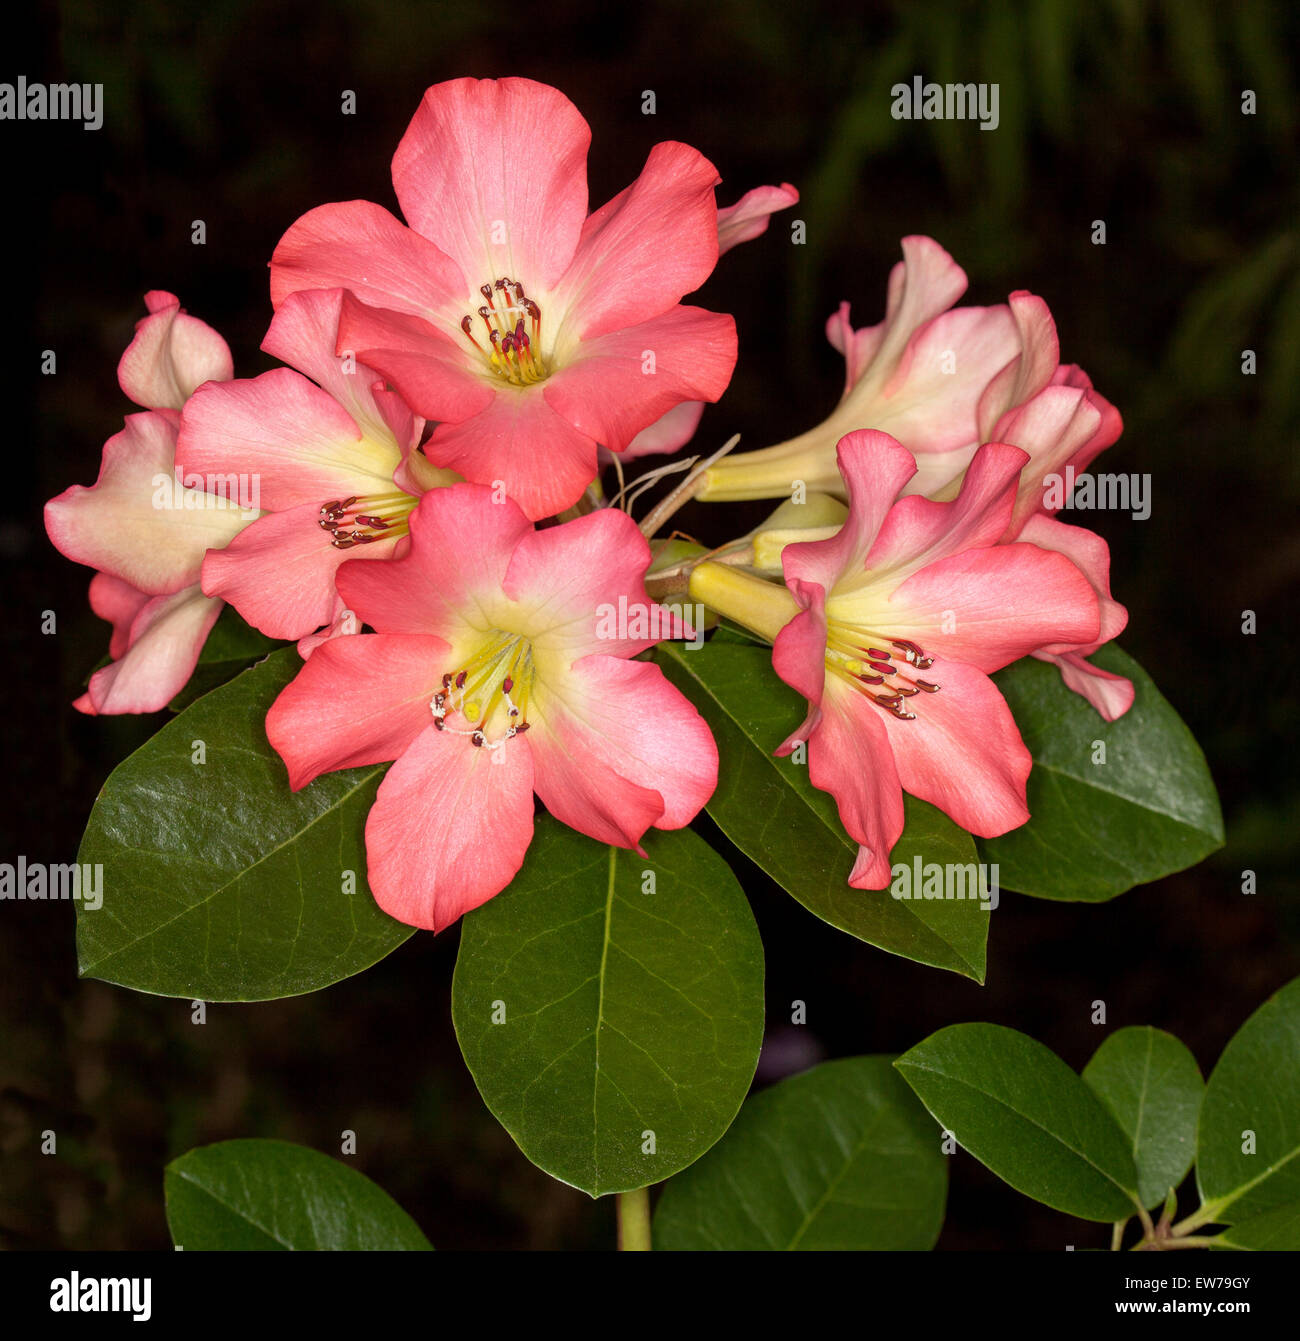 Cluster of spectacular deep pink flowers of tropical vireya rhododendron 'Strawberry Parfait' & dark green leaves on black background Stock Photo